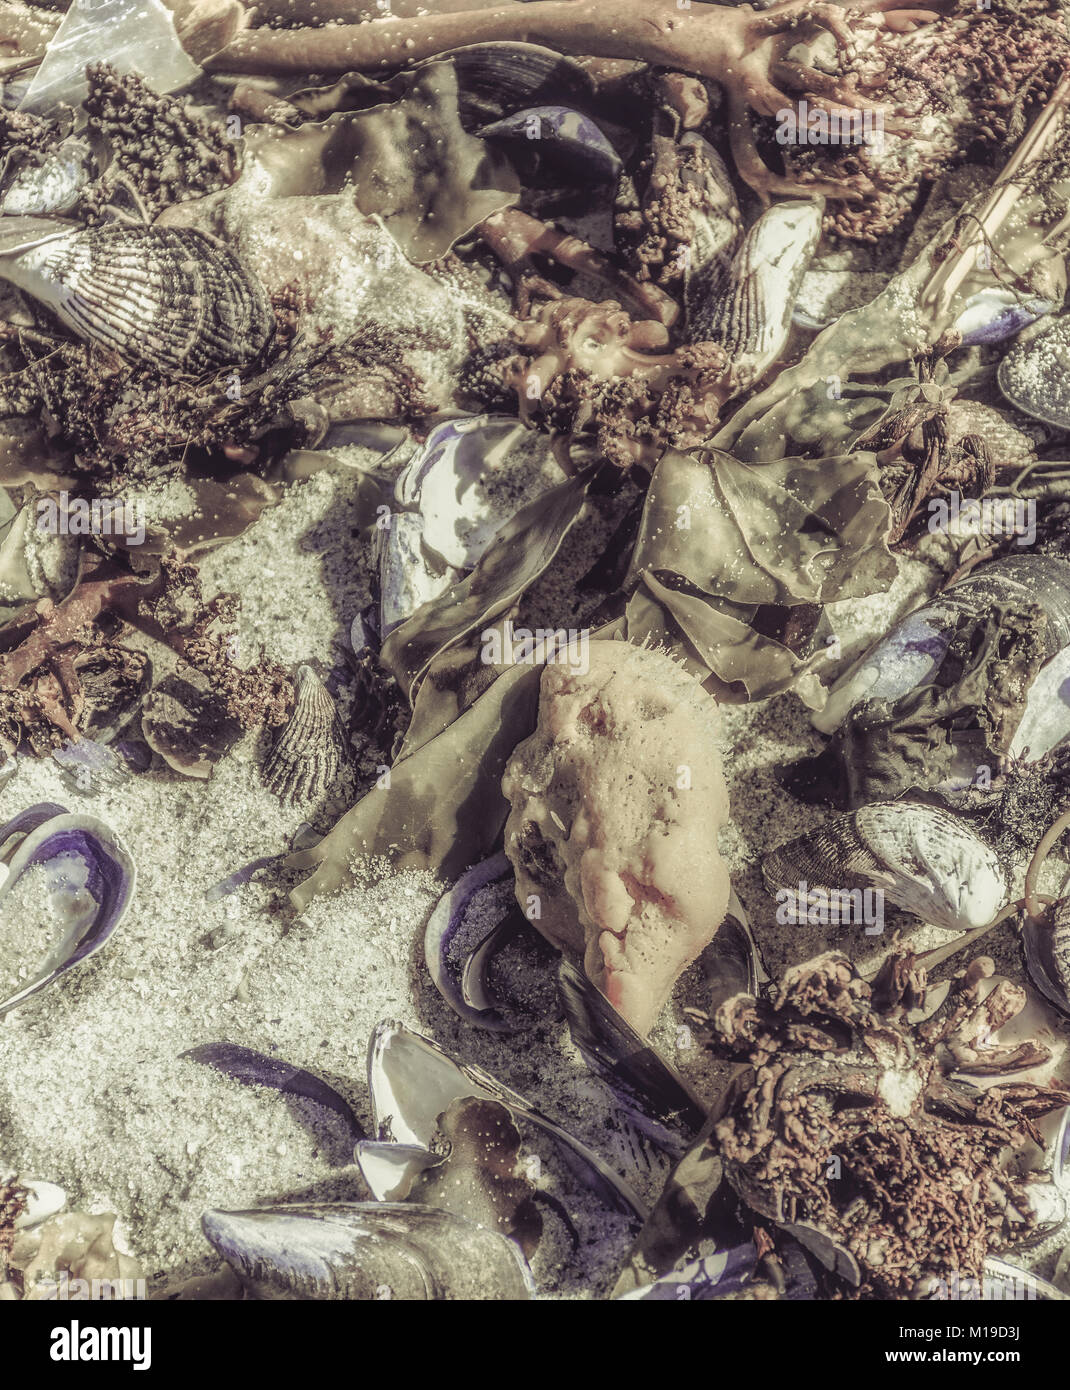 Fine art still life outdoor photo of a collection/a collage of sea plants, mussels and animals stranded on a white sand beach in vintage style Stock Photo